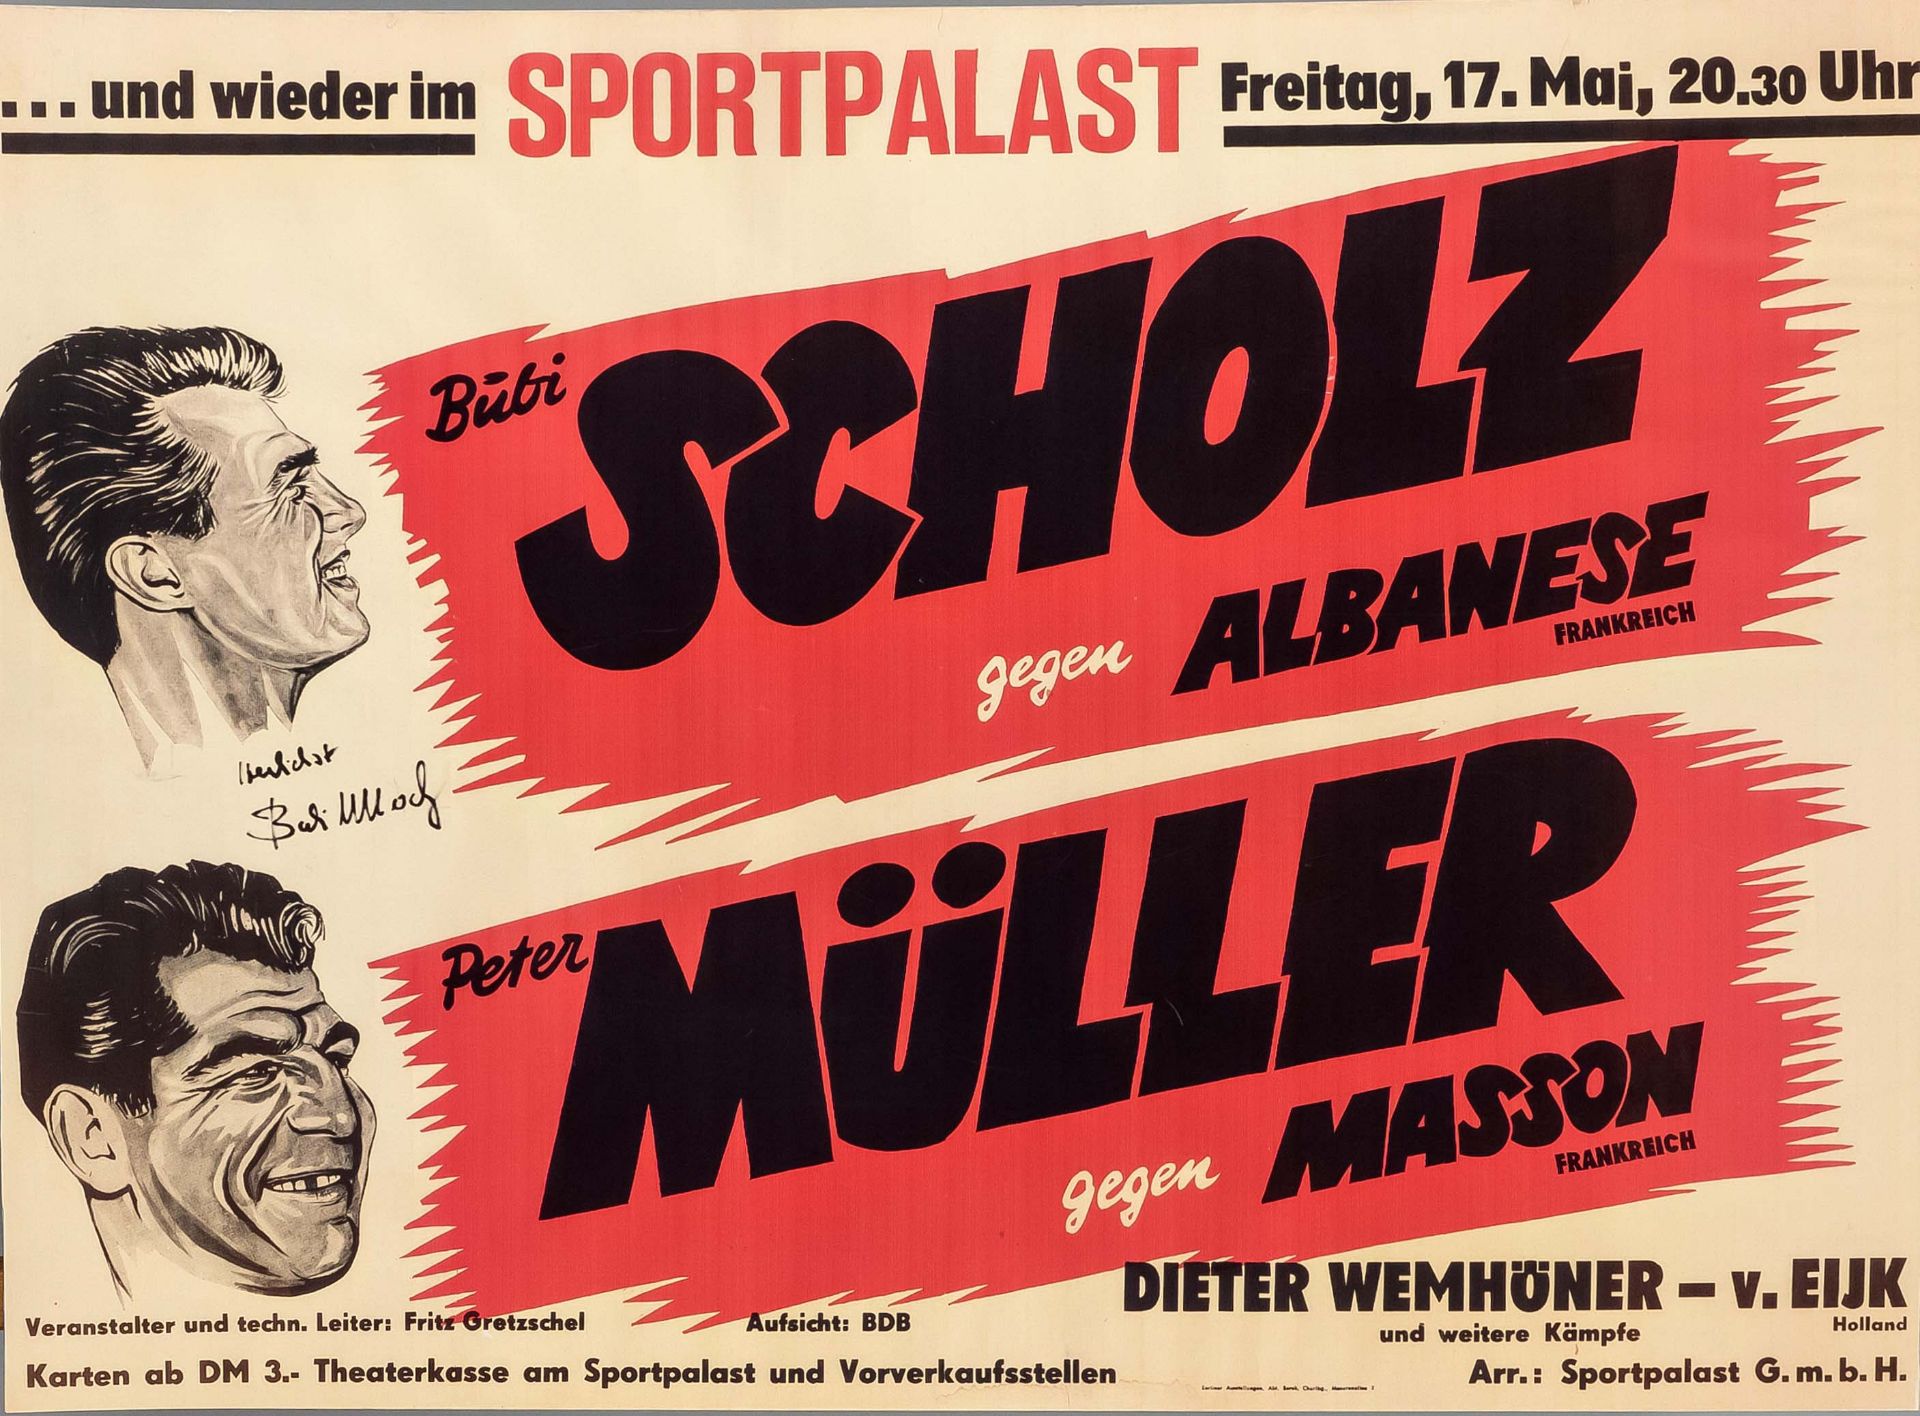 Bubi Scholz - poster signed by his own hand for a boxing match against Albanese in the Berlin